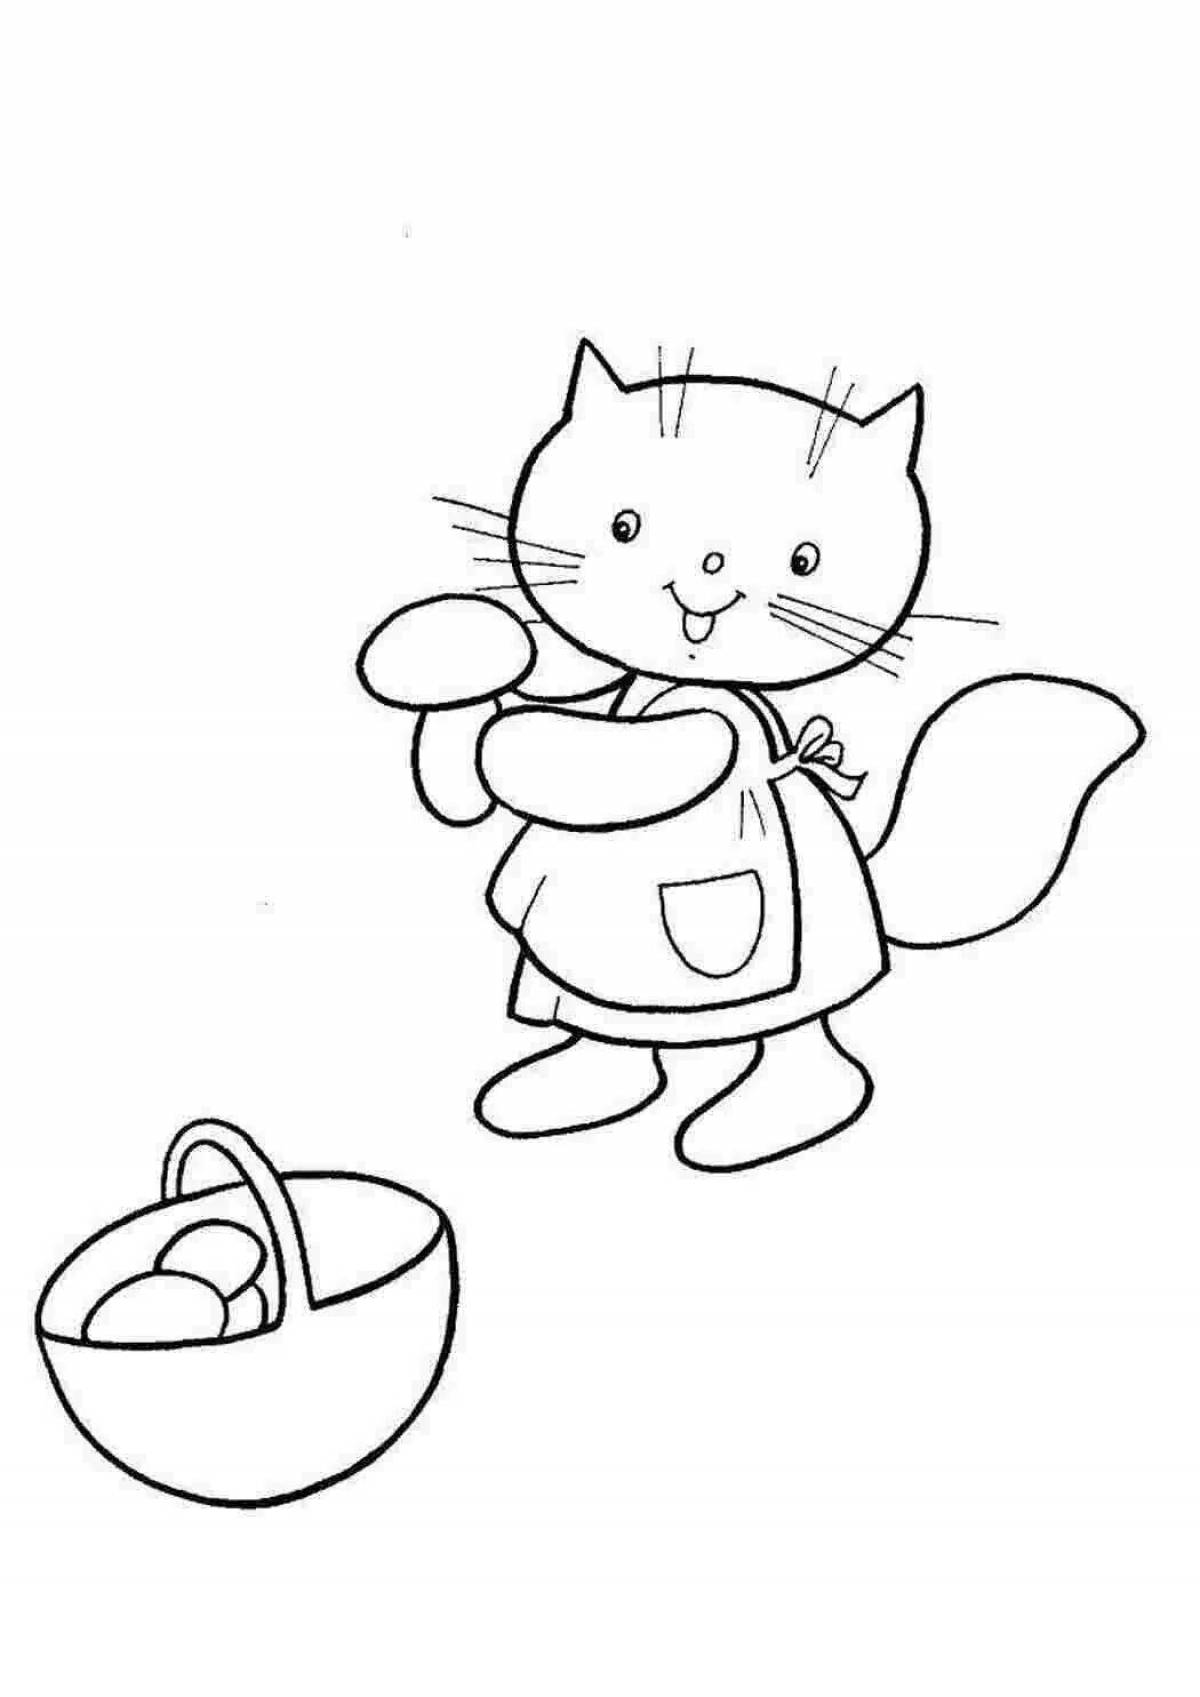 Wiggly little kitty coloring page